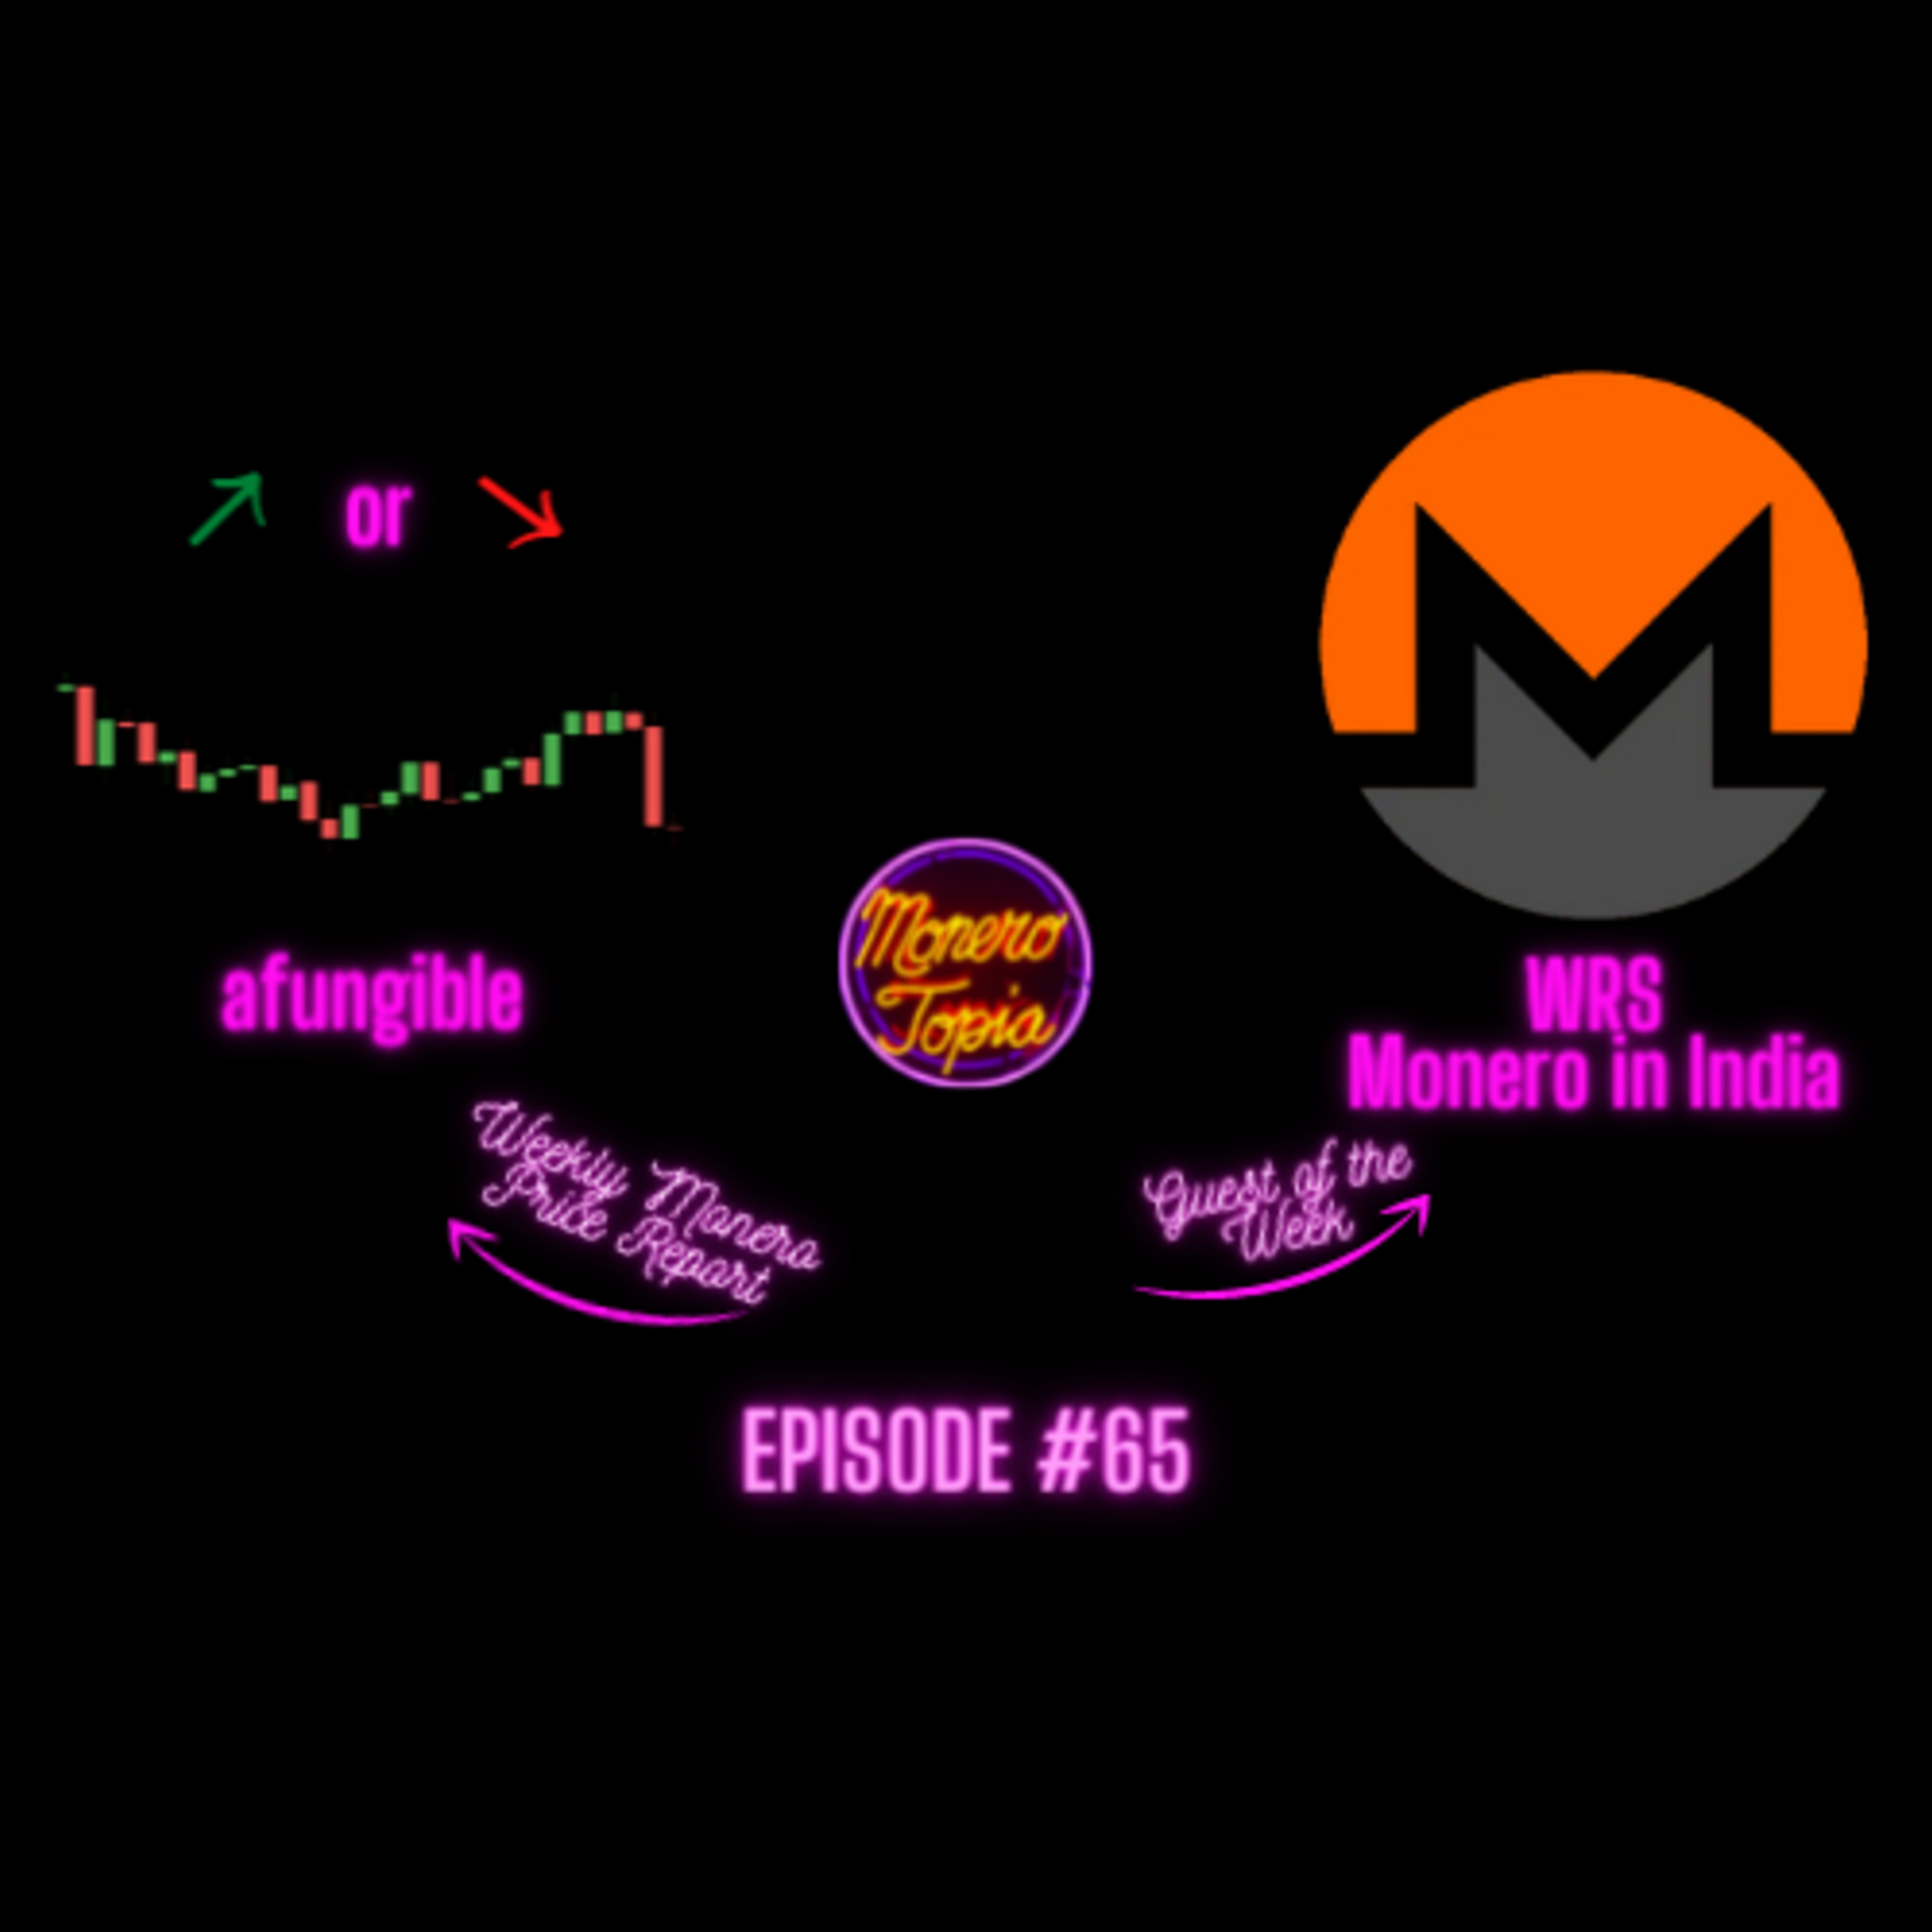 Price Report w/ aFungible, special guest WRS to chat about Monero in India! Epi #65